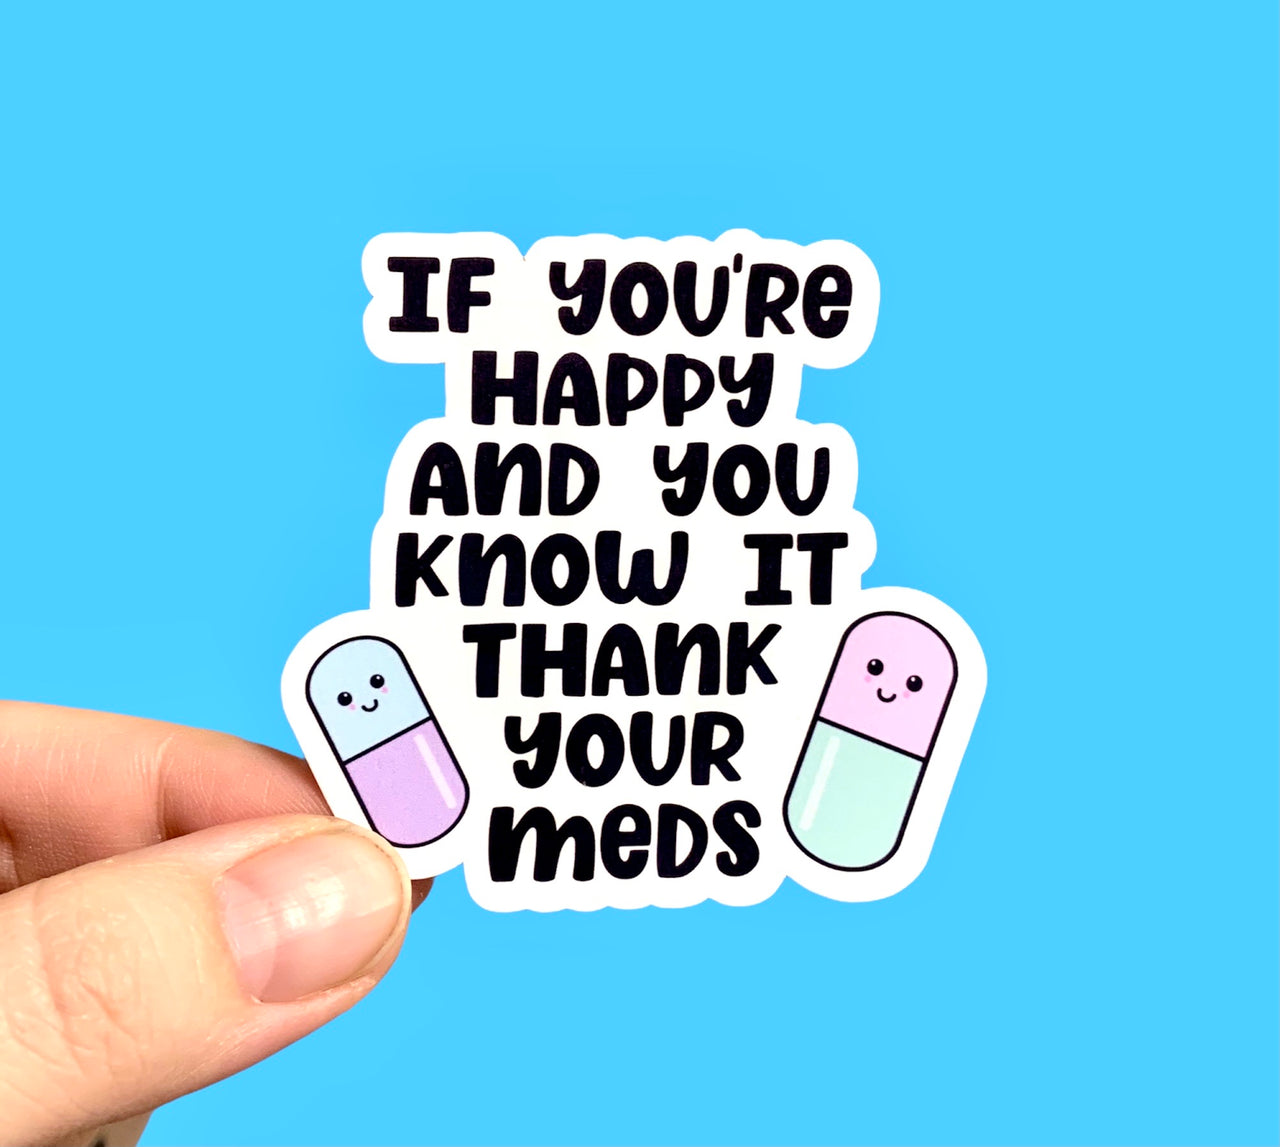 If you’re happy and you know it thank your meds (pack of 3 or 5 stickers)